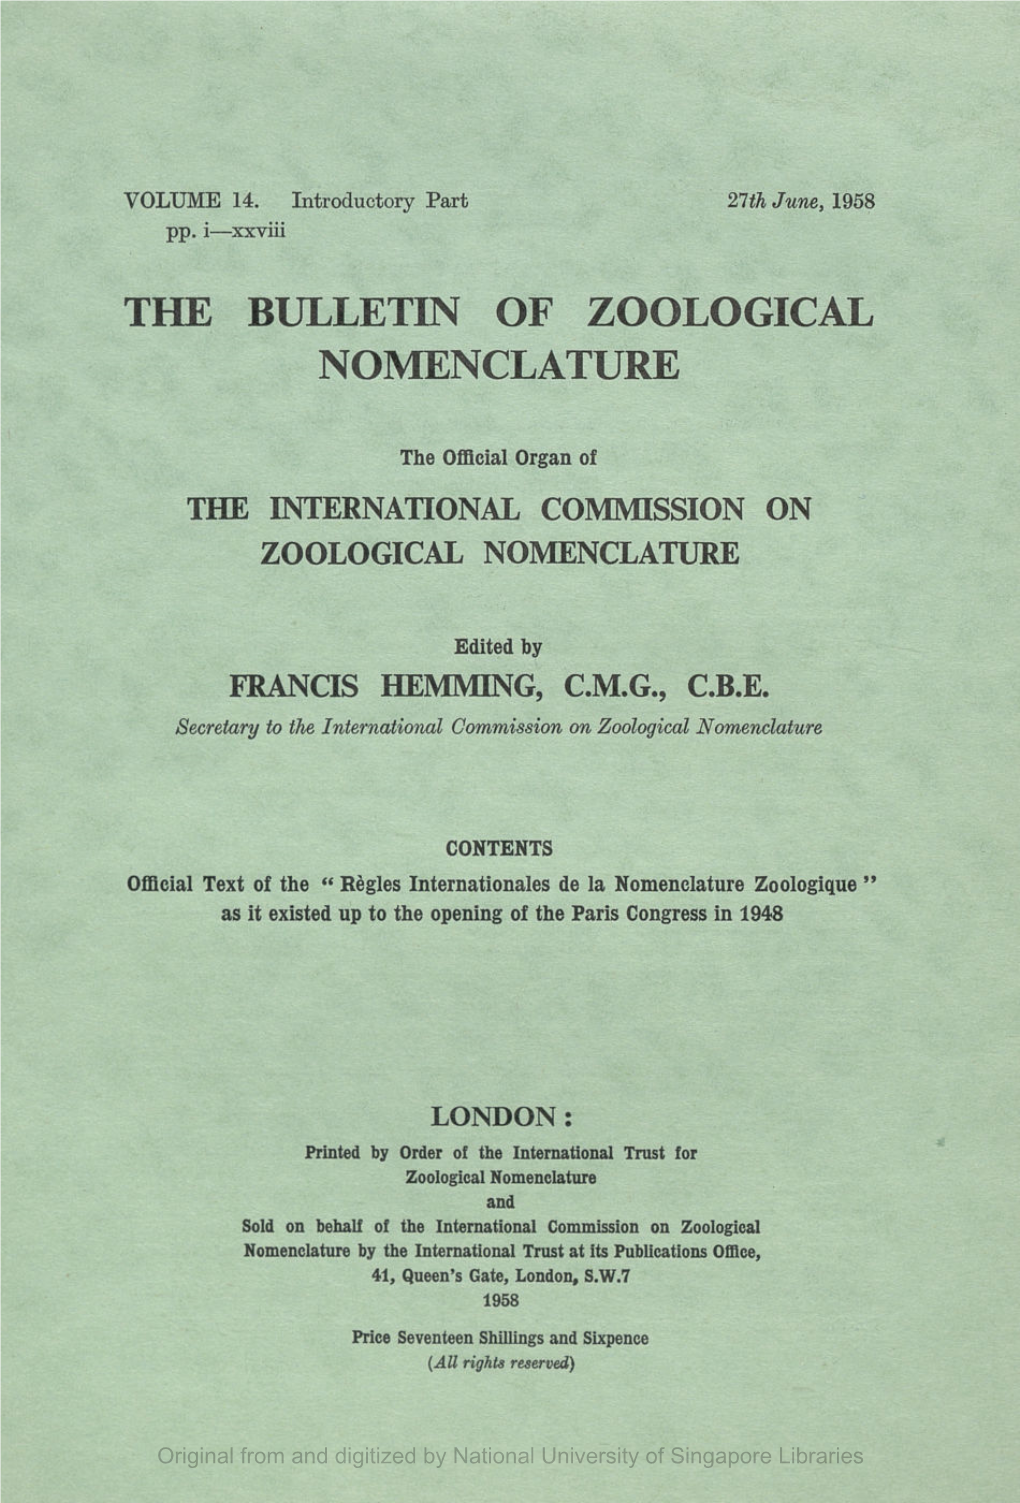 The Bulletin of Zoological Nomenclature. Vol 14, Intro